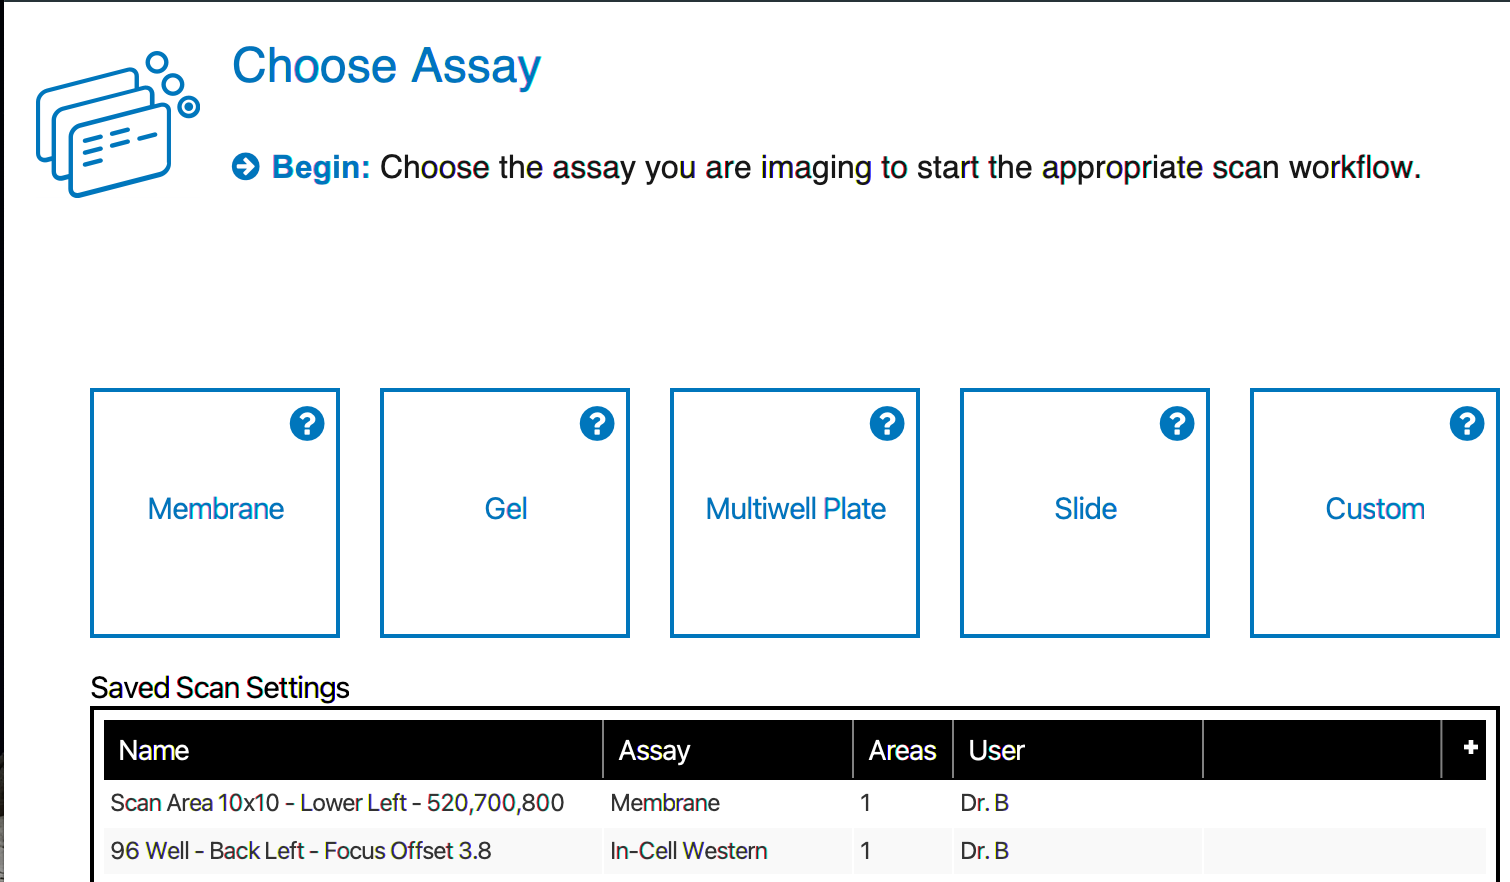 List of saved scan settings on the Choose Assay page ready for image acquisition on an Odyssey M Imager.